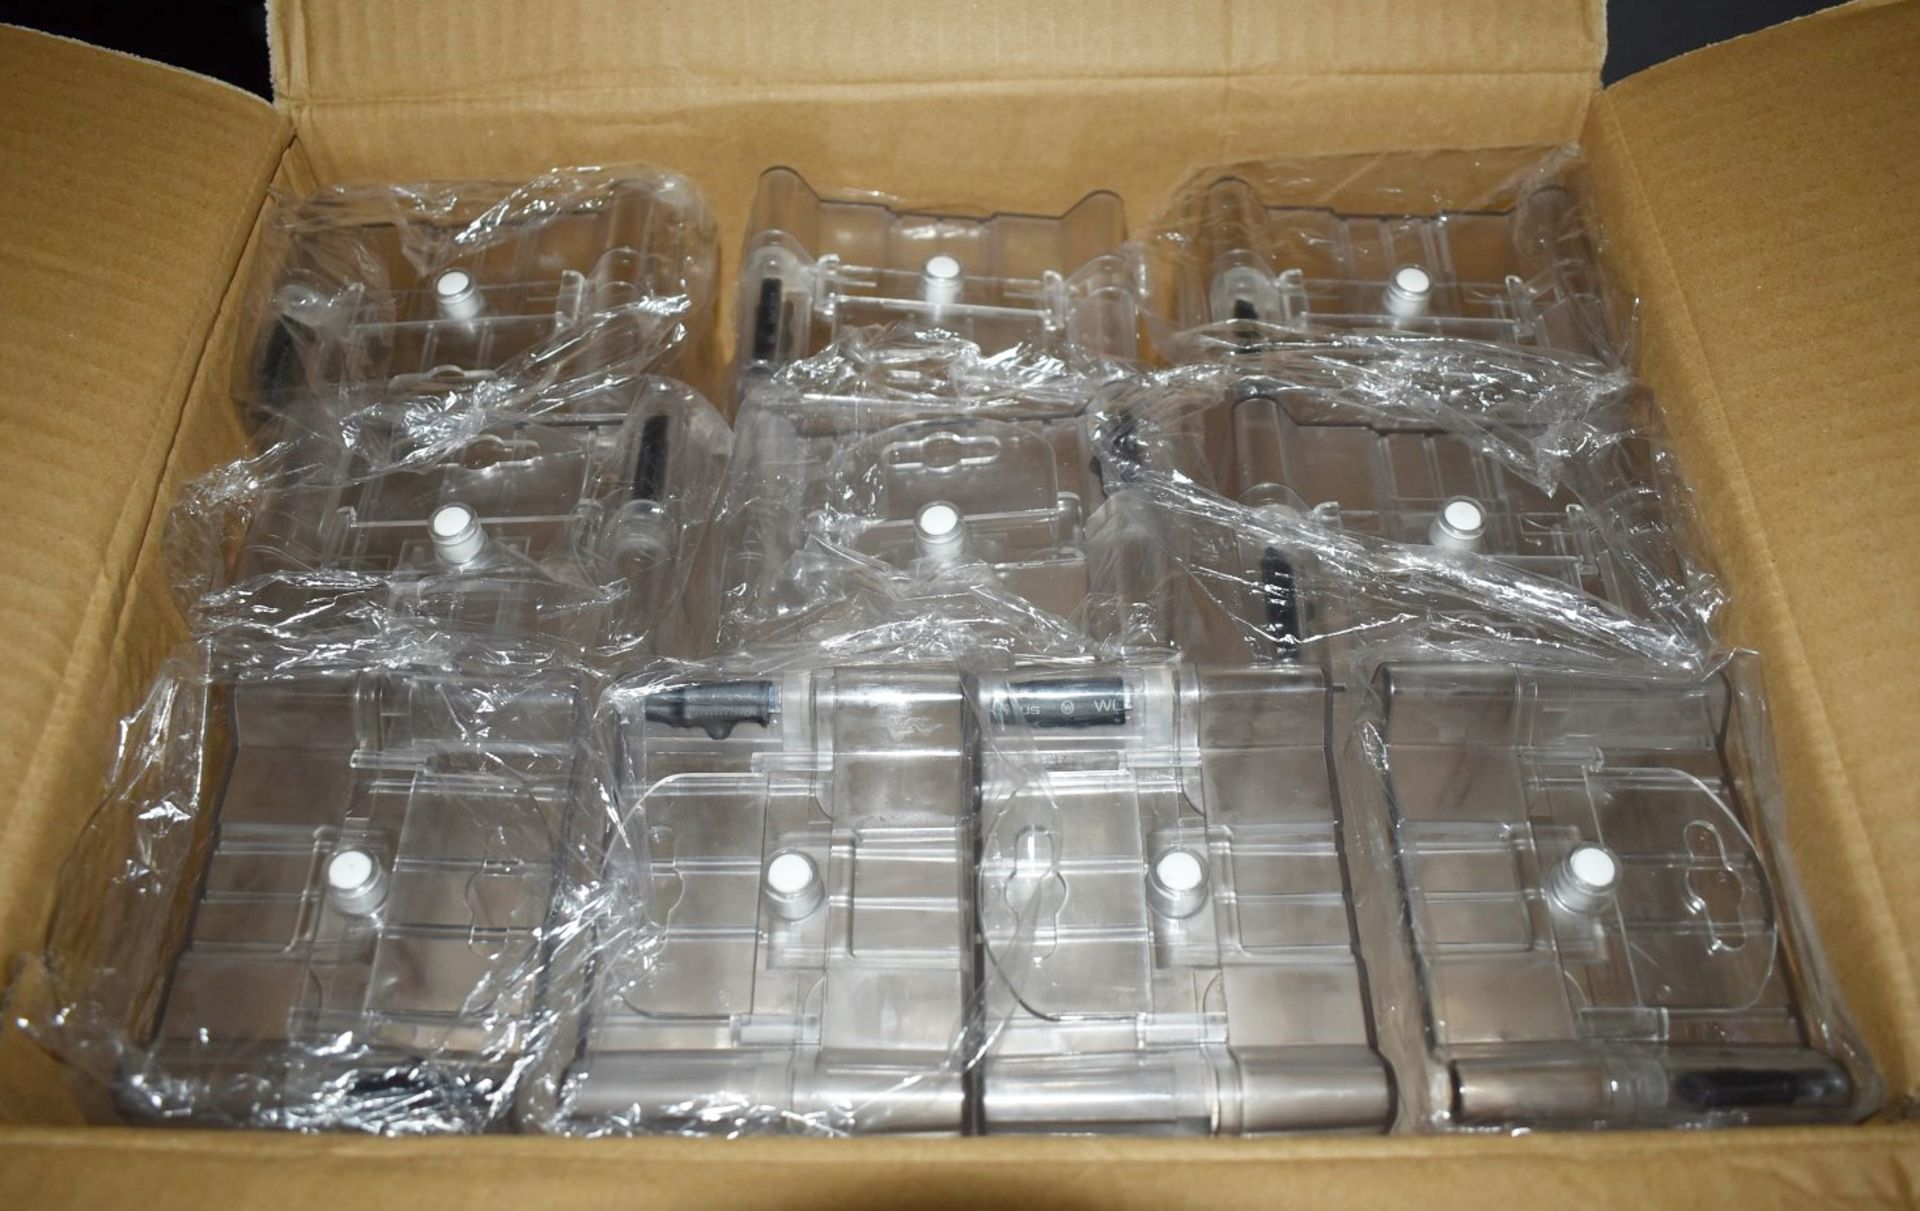 40 x Catalyst Clear Acrylic Retail Security Safer Cases With RF Tags and Hanging Tags - Brand New - Image 8 of 8